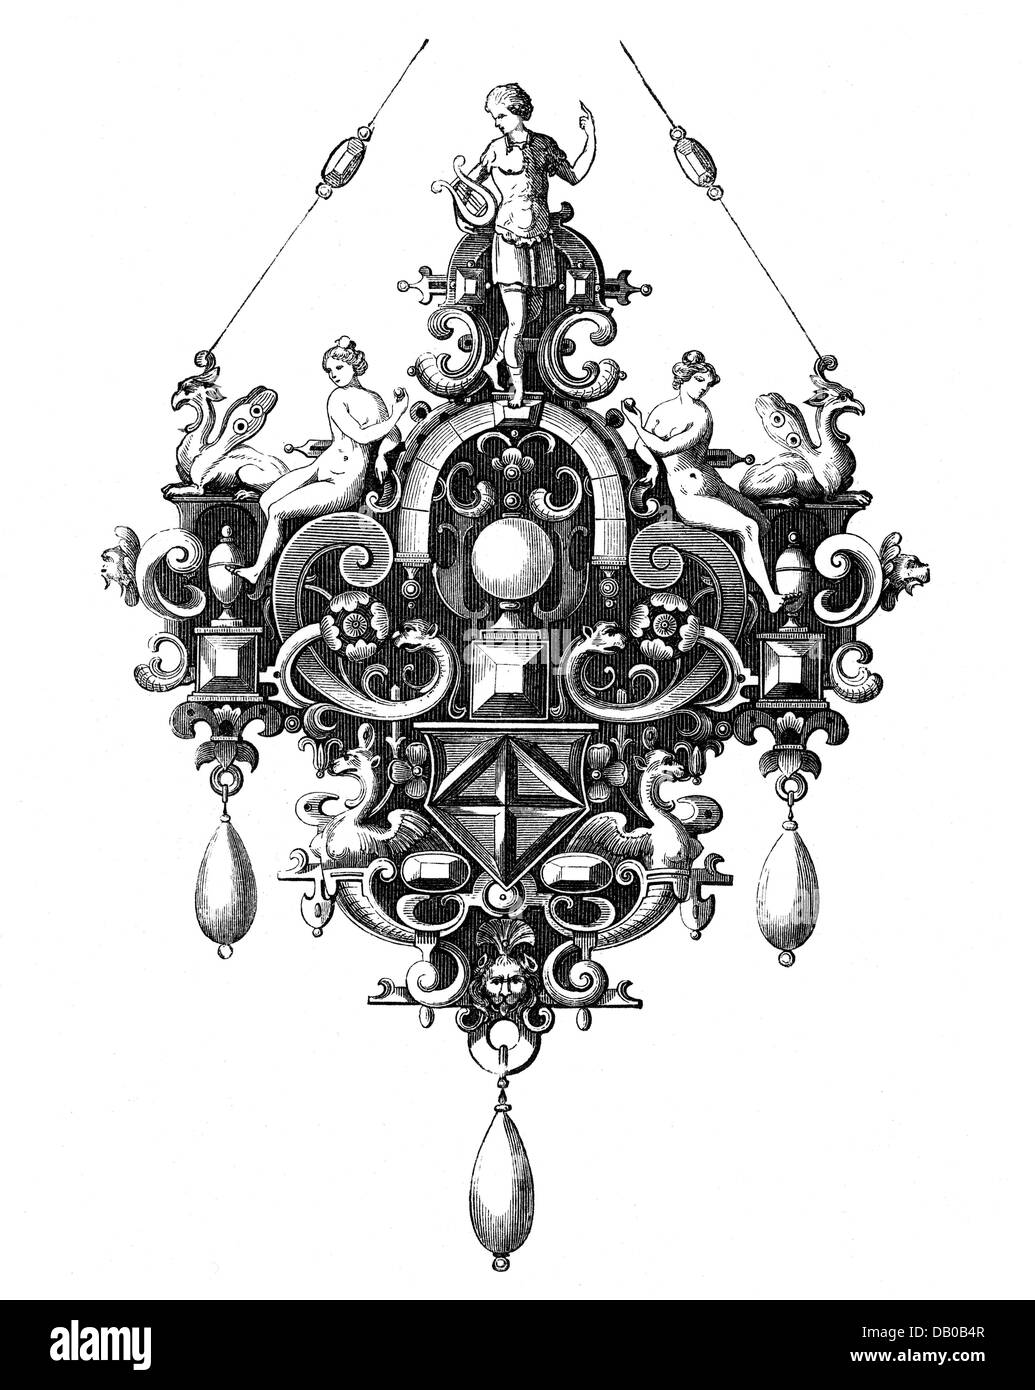 fine arts, handicrafts, pendant, based on a model by Benvenuto Cellini, 16th century, ancient cabinet, Imperial library, Paris, wood engraving, Additional-Rights-Clearences-Not Available Stock Photo